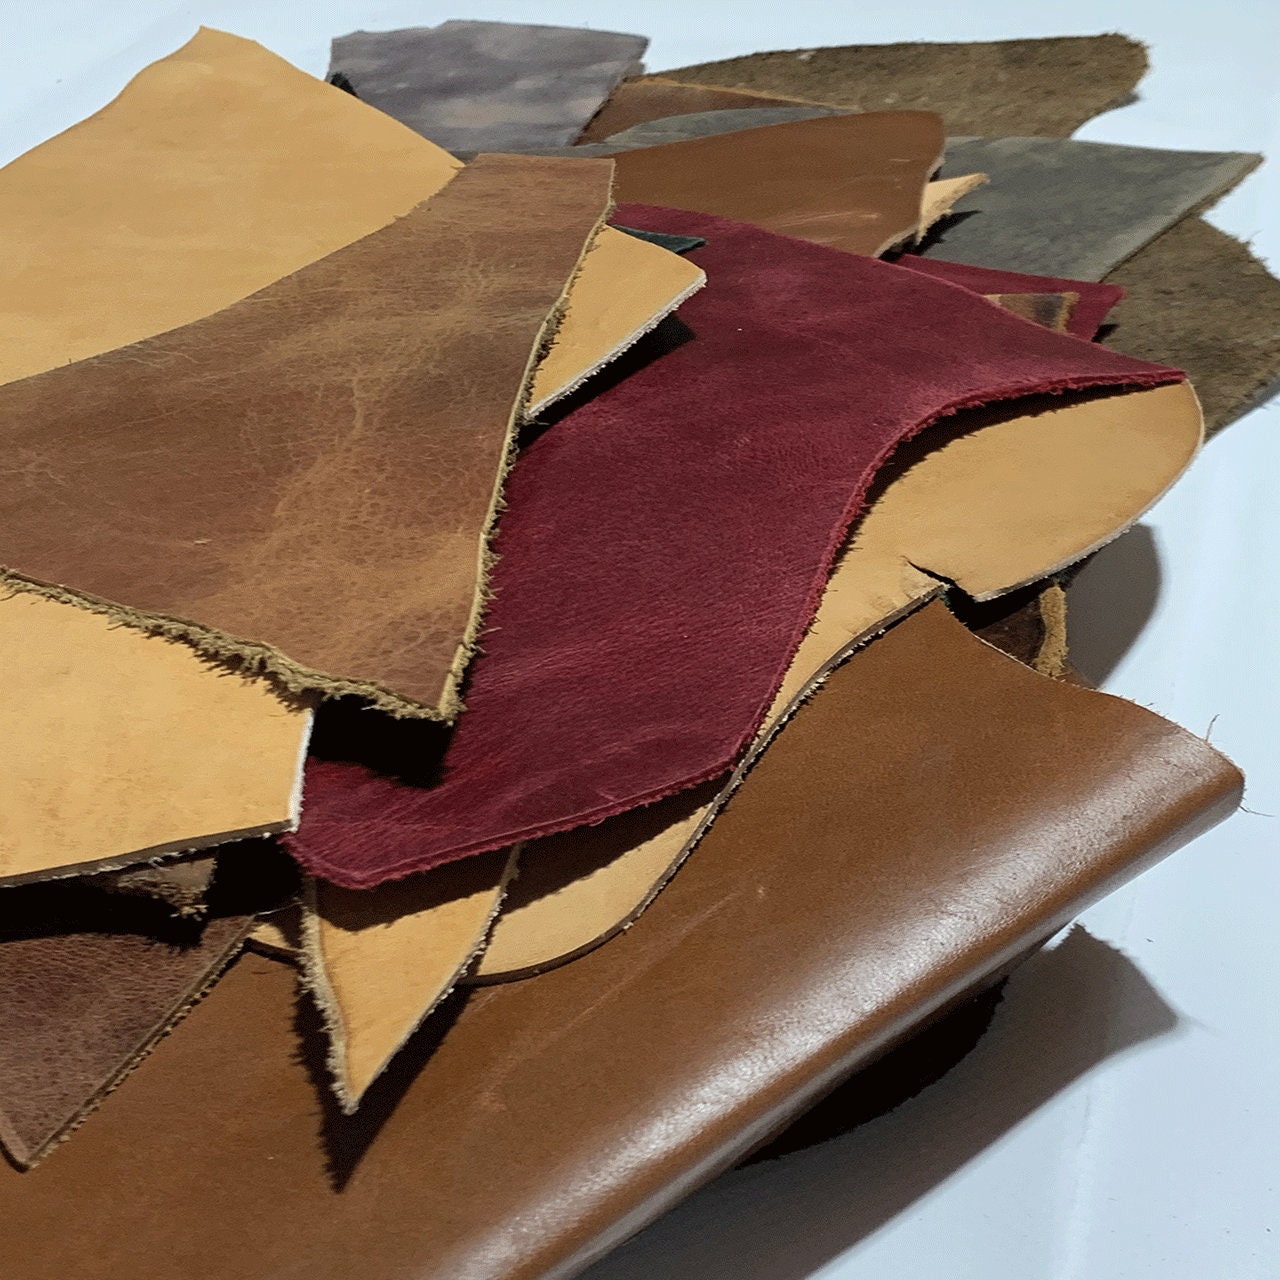  REED Scraps - 2 Pound Leather from Garment Cutting